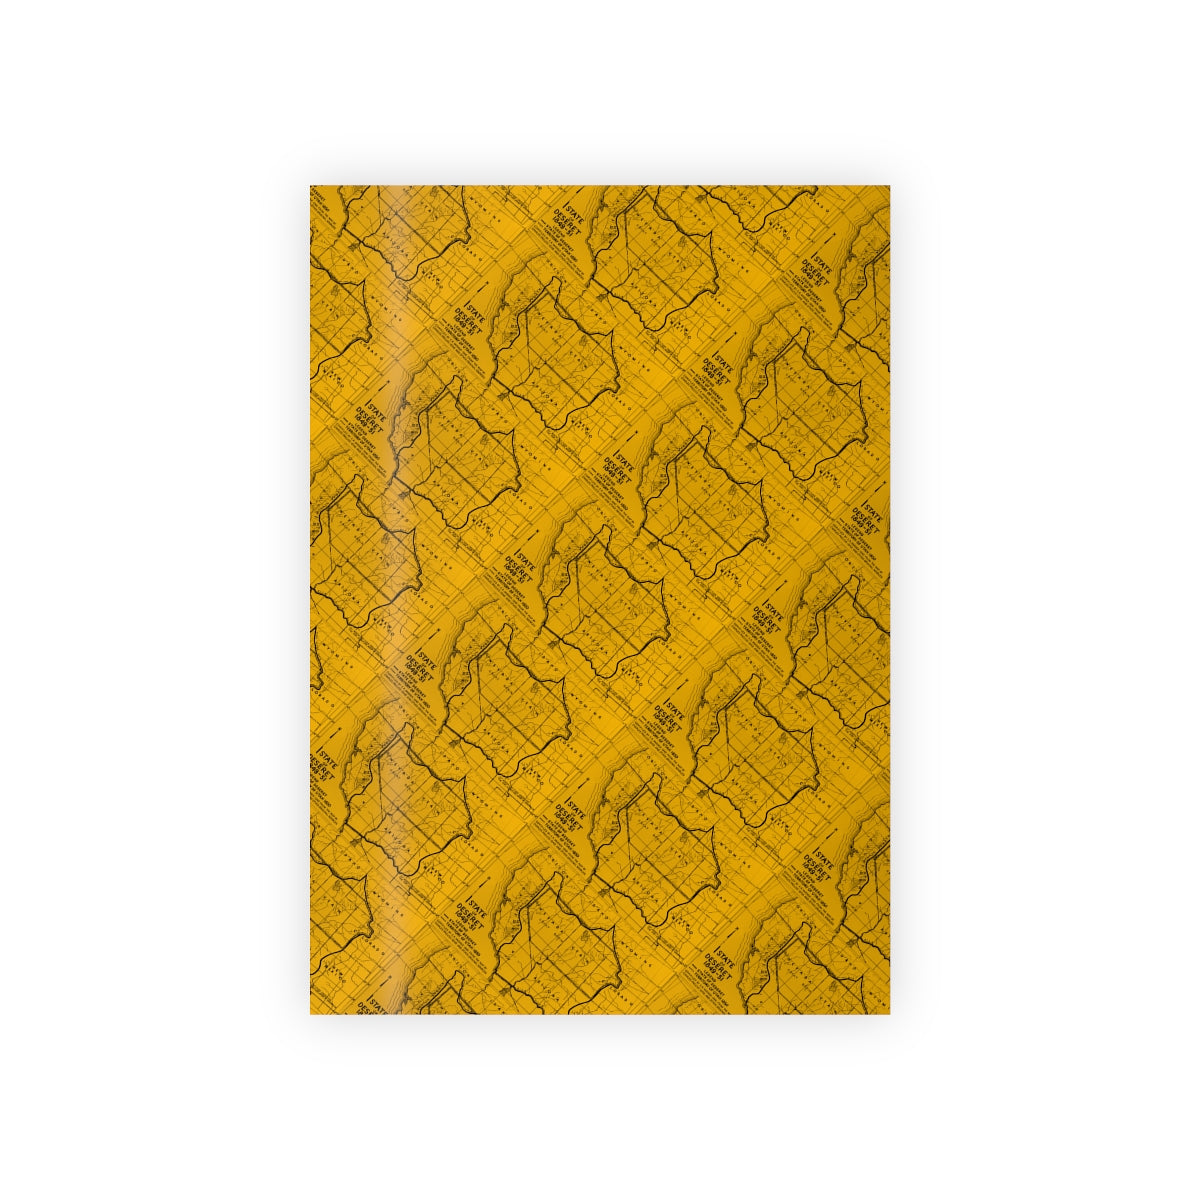 Deseret State Map - Gift Wrapping Paper